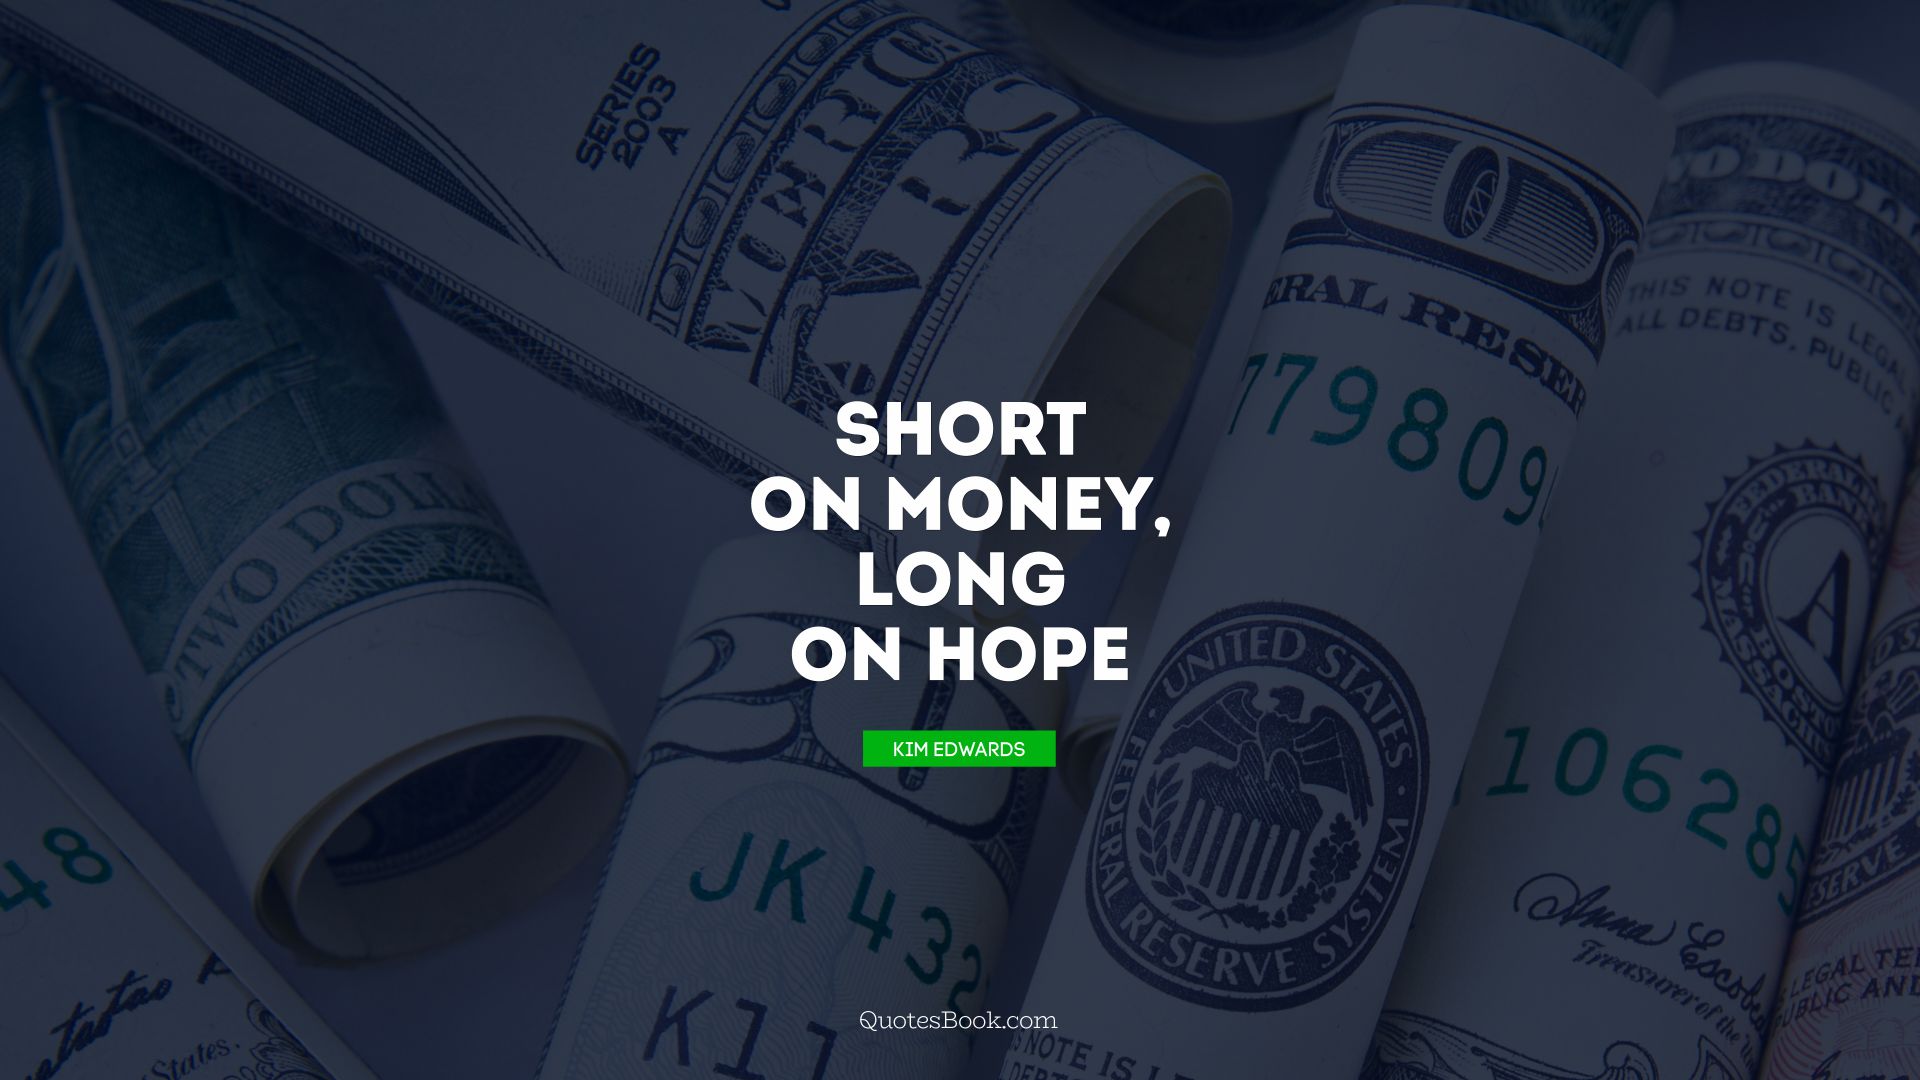 Short on money, long on hope. - Quote by Kim Edwards